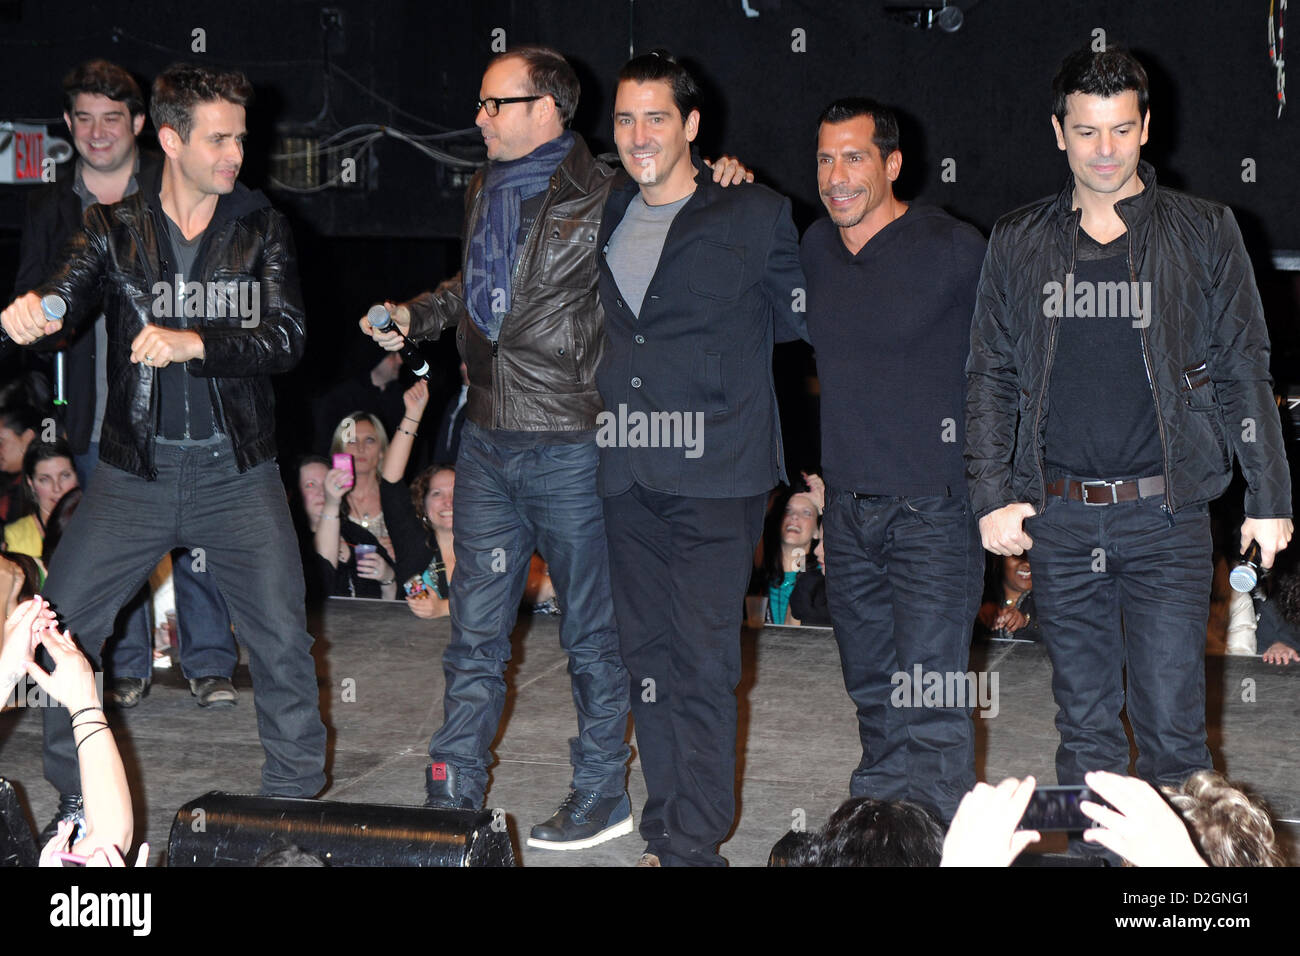 Band members from The New Kids On The Block (L-R) Joey McIntyre, Donnie Wahlberg, Jonathan Knight, Danny Wood and Jordan Knight during the New Kids On The Block Tour Announcement at Irving Plaza on January 22, 2013 in New York City Stock Photo